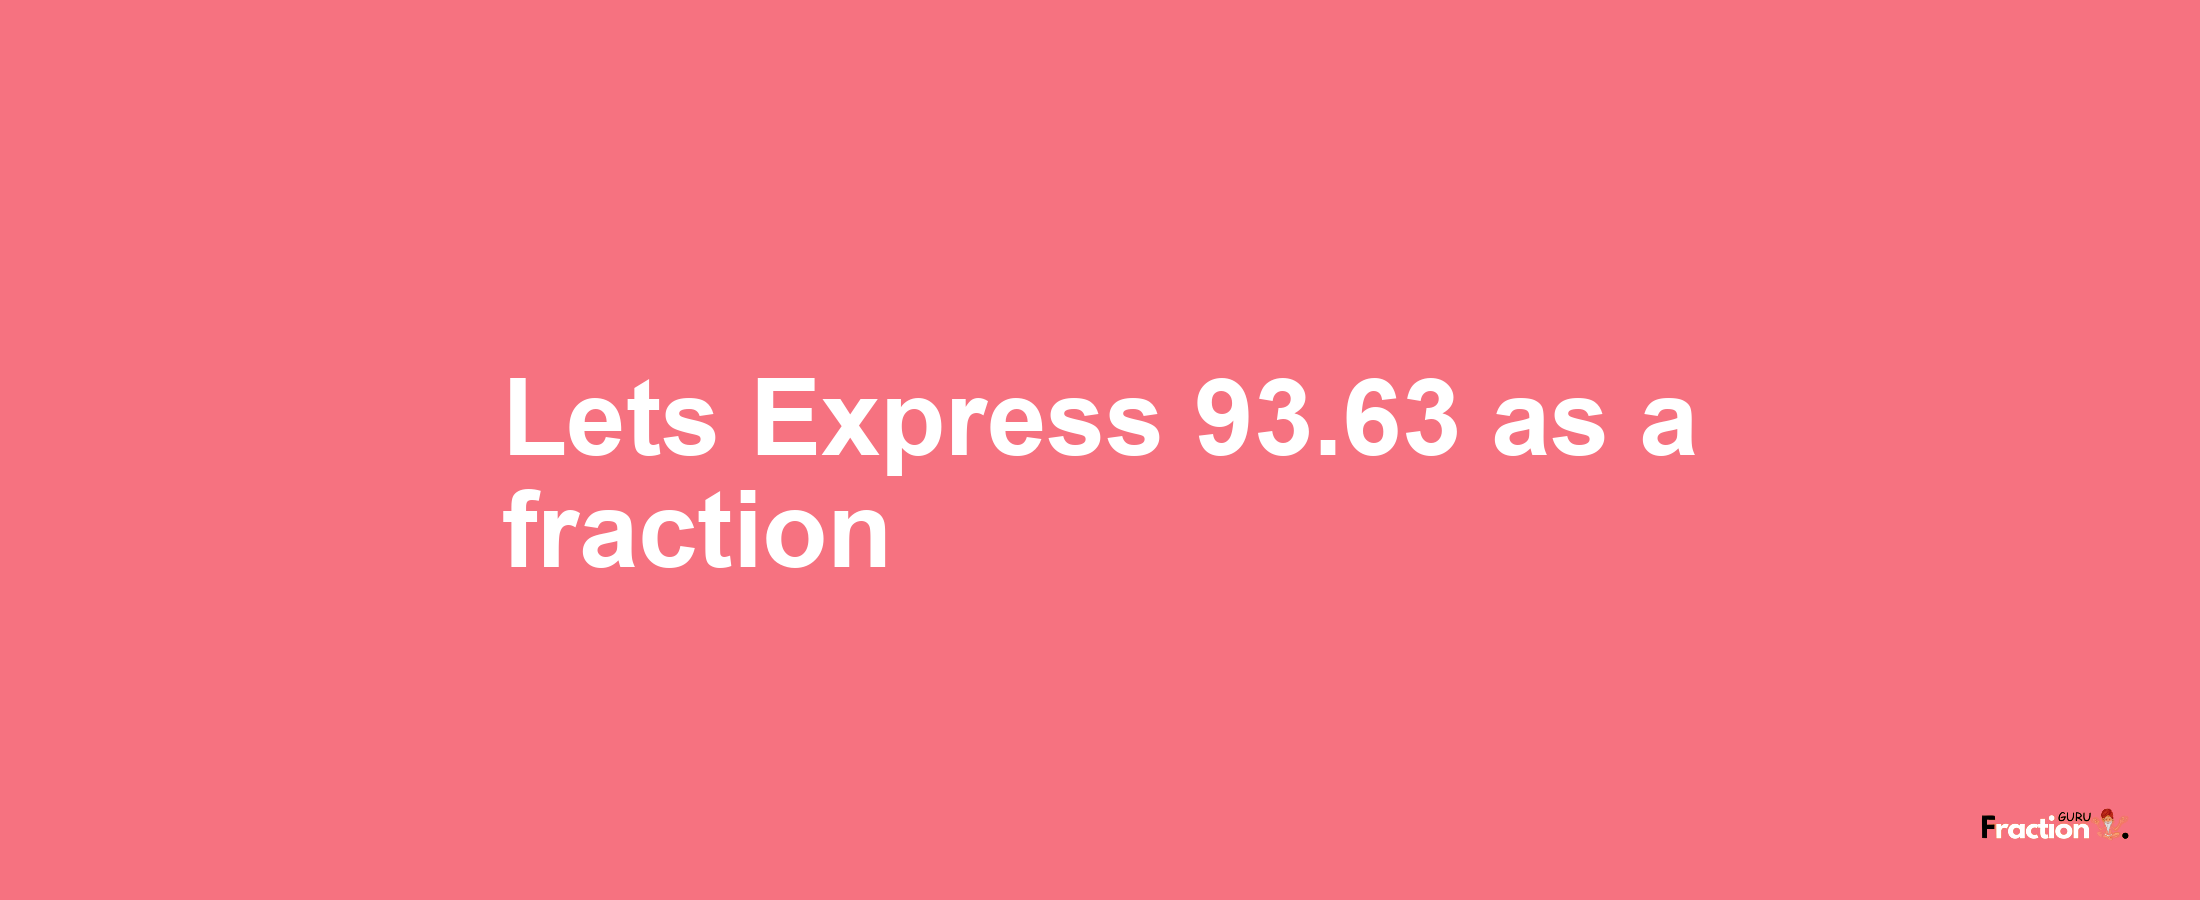 Lets Express 93.63 as afraction